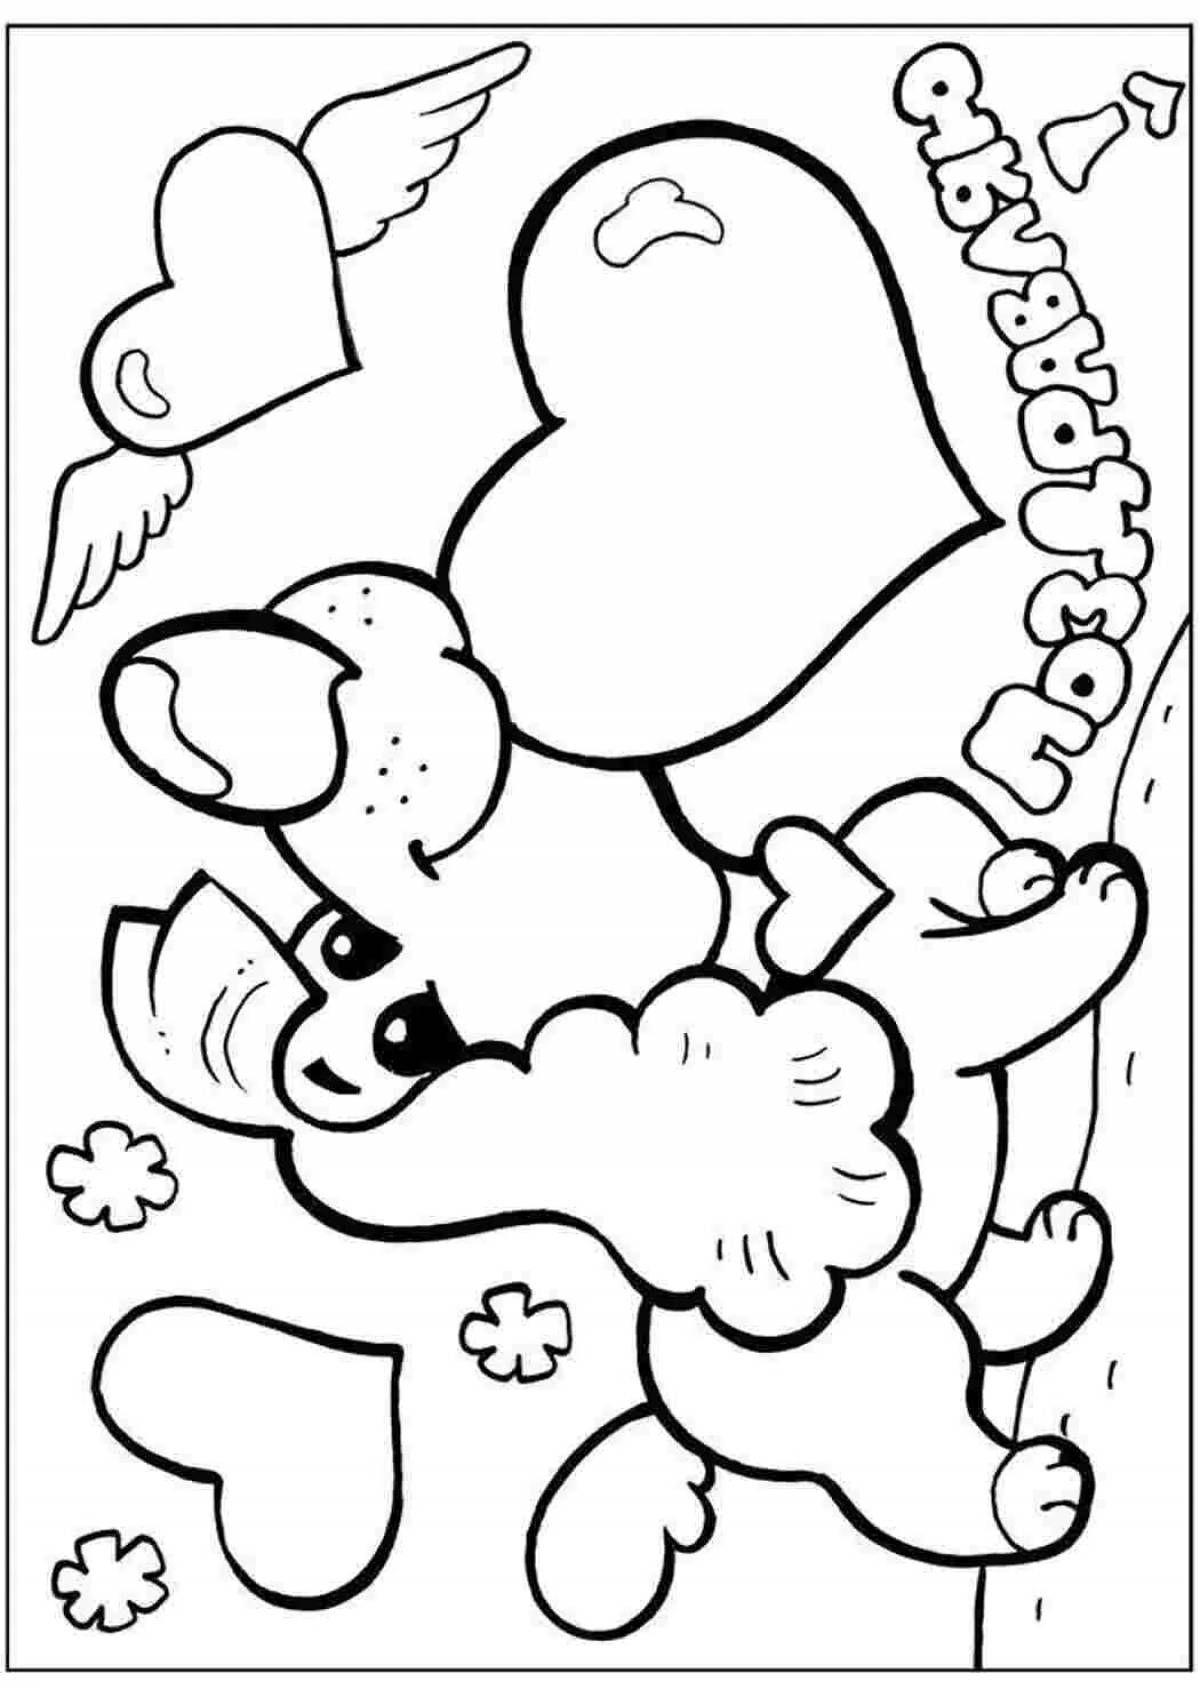 Playful coloring card for kids